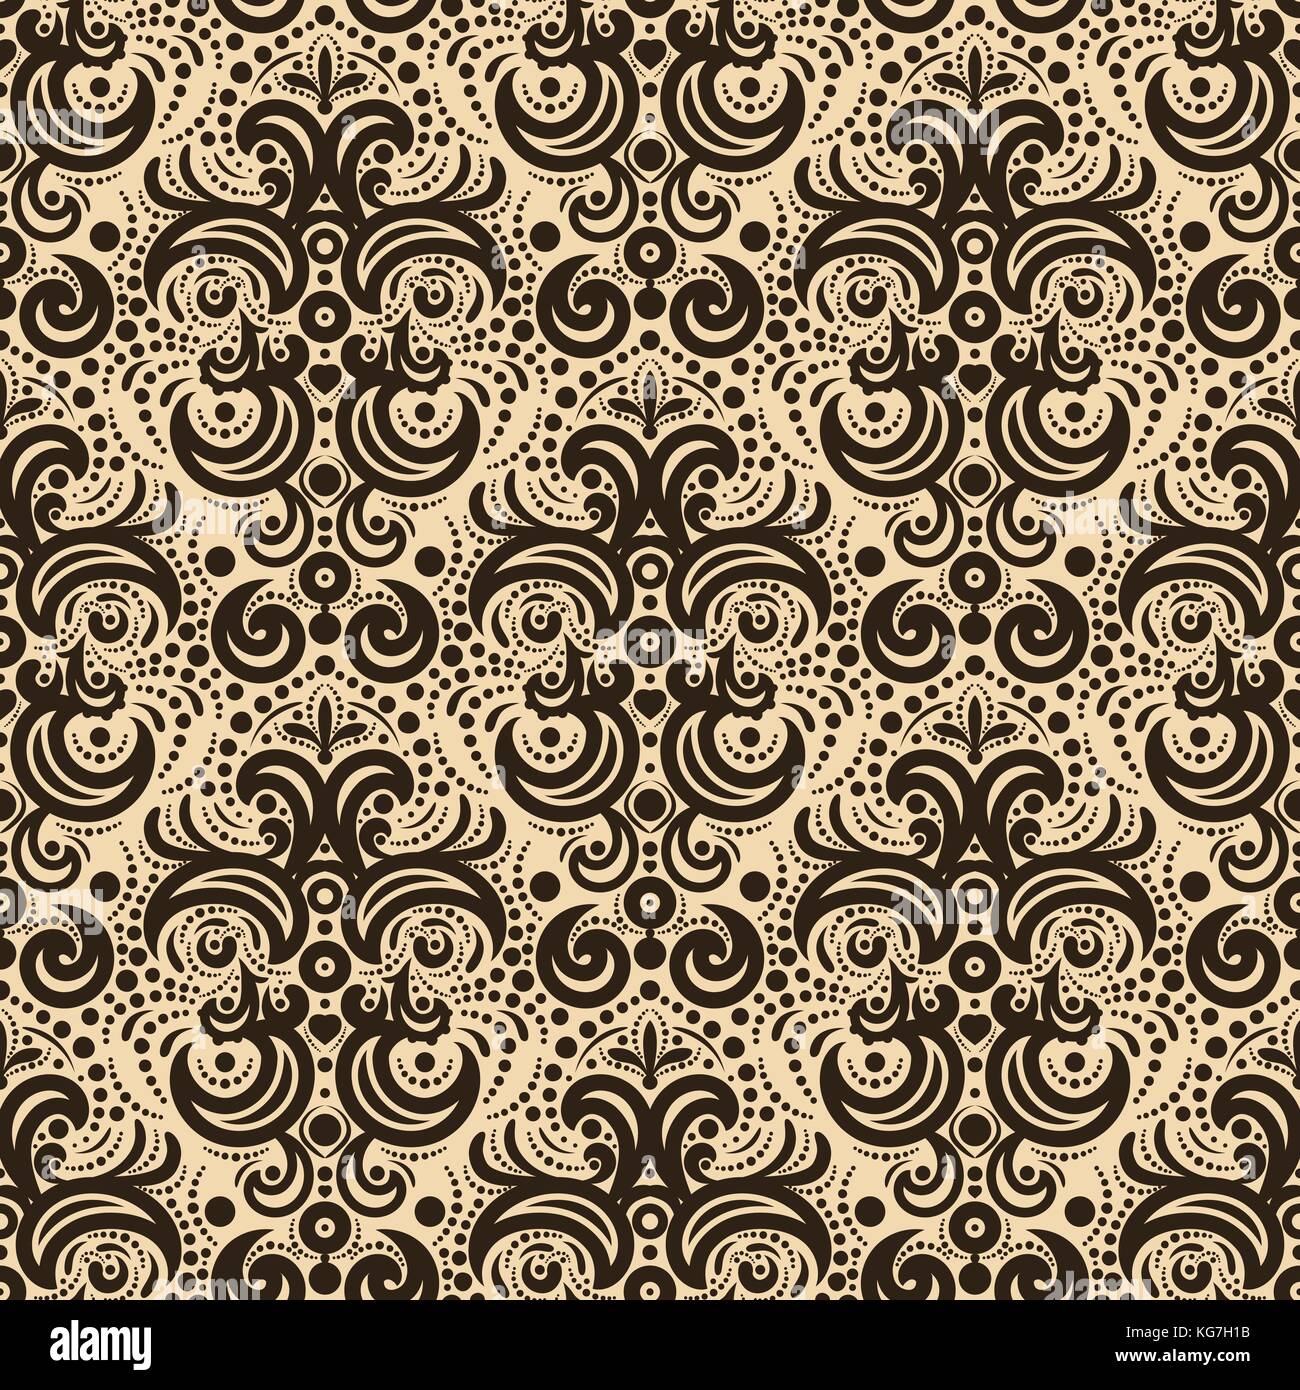 Brown Beige Seamless Fabric Texture Pattern Stock Vector - Illustration of  indoors, picnic: 50760013